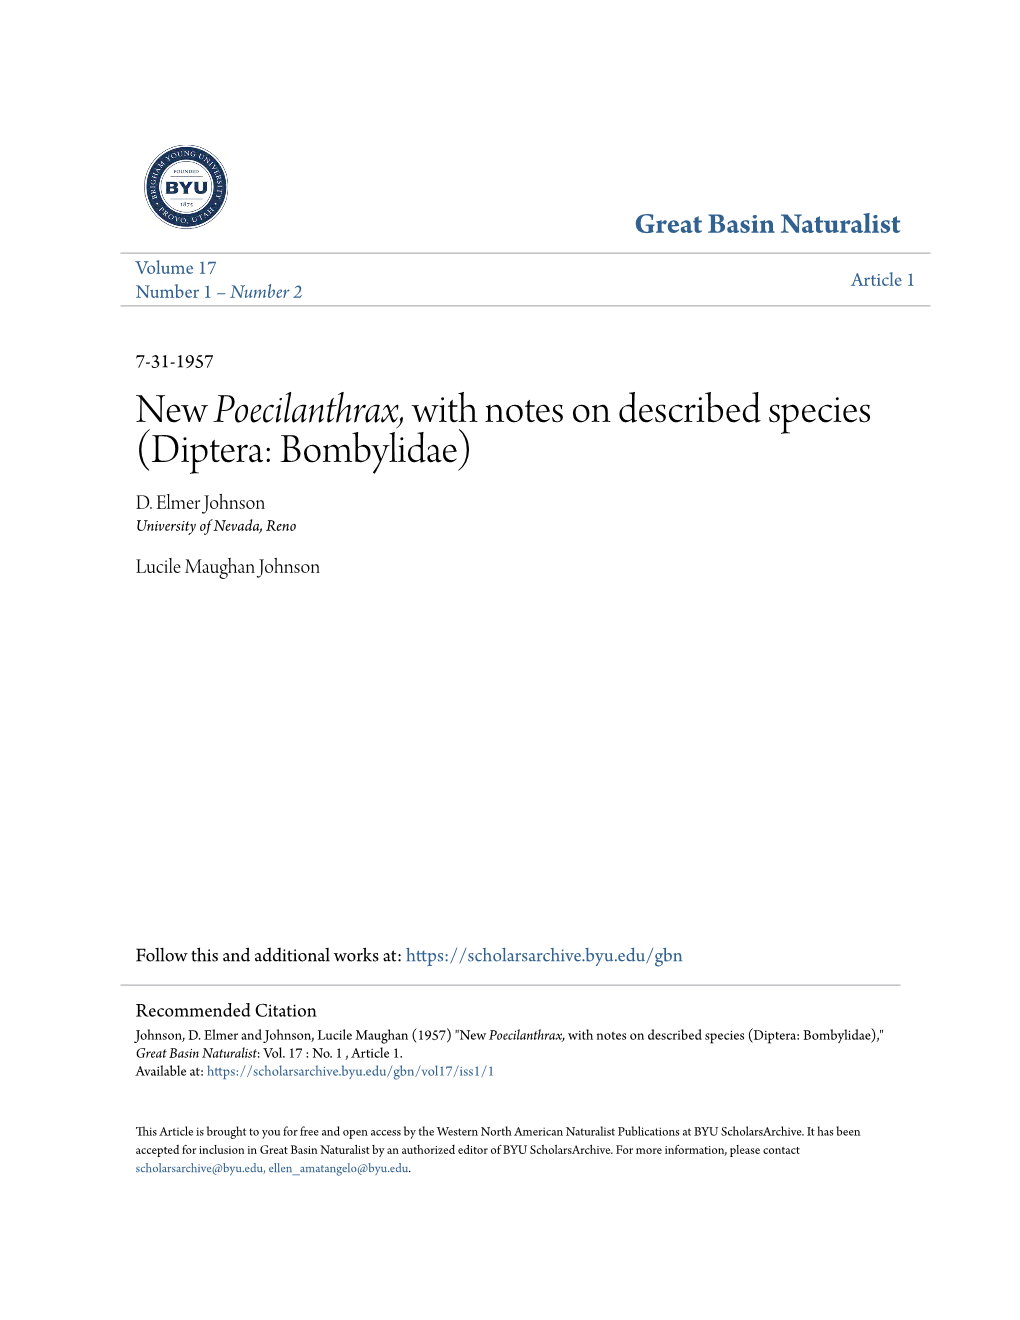 New Poecilanthrax, with Notes on Described Species (Diptera: Bombylidae) D